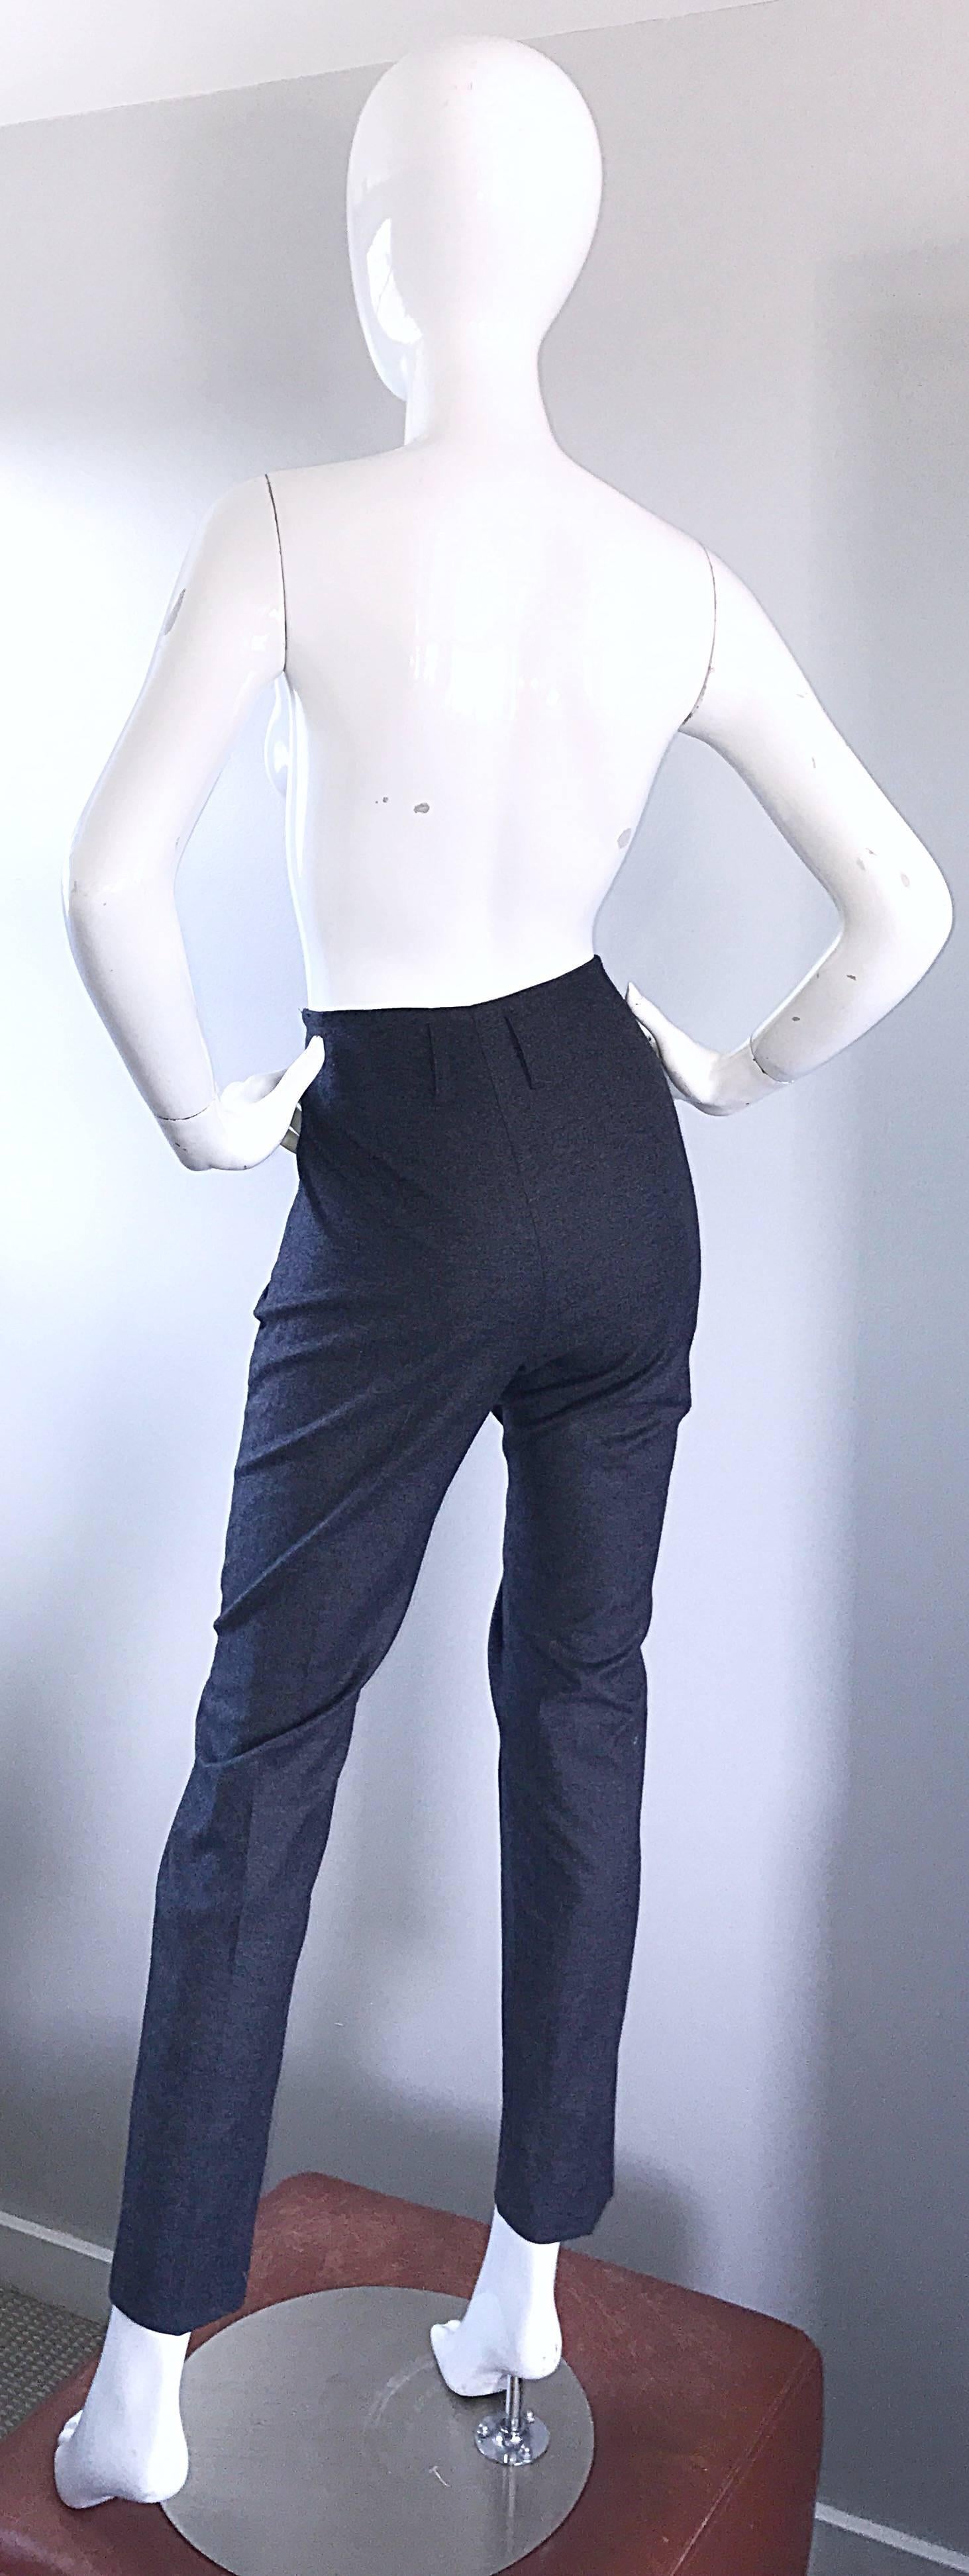 Yves Saint Laurent Size 8 Fall 07 Stefano Pilati Grey High Waist Wool Slim Pants In Excellent Condition For Sale In San Diego, CA